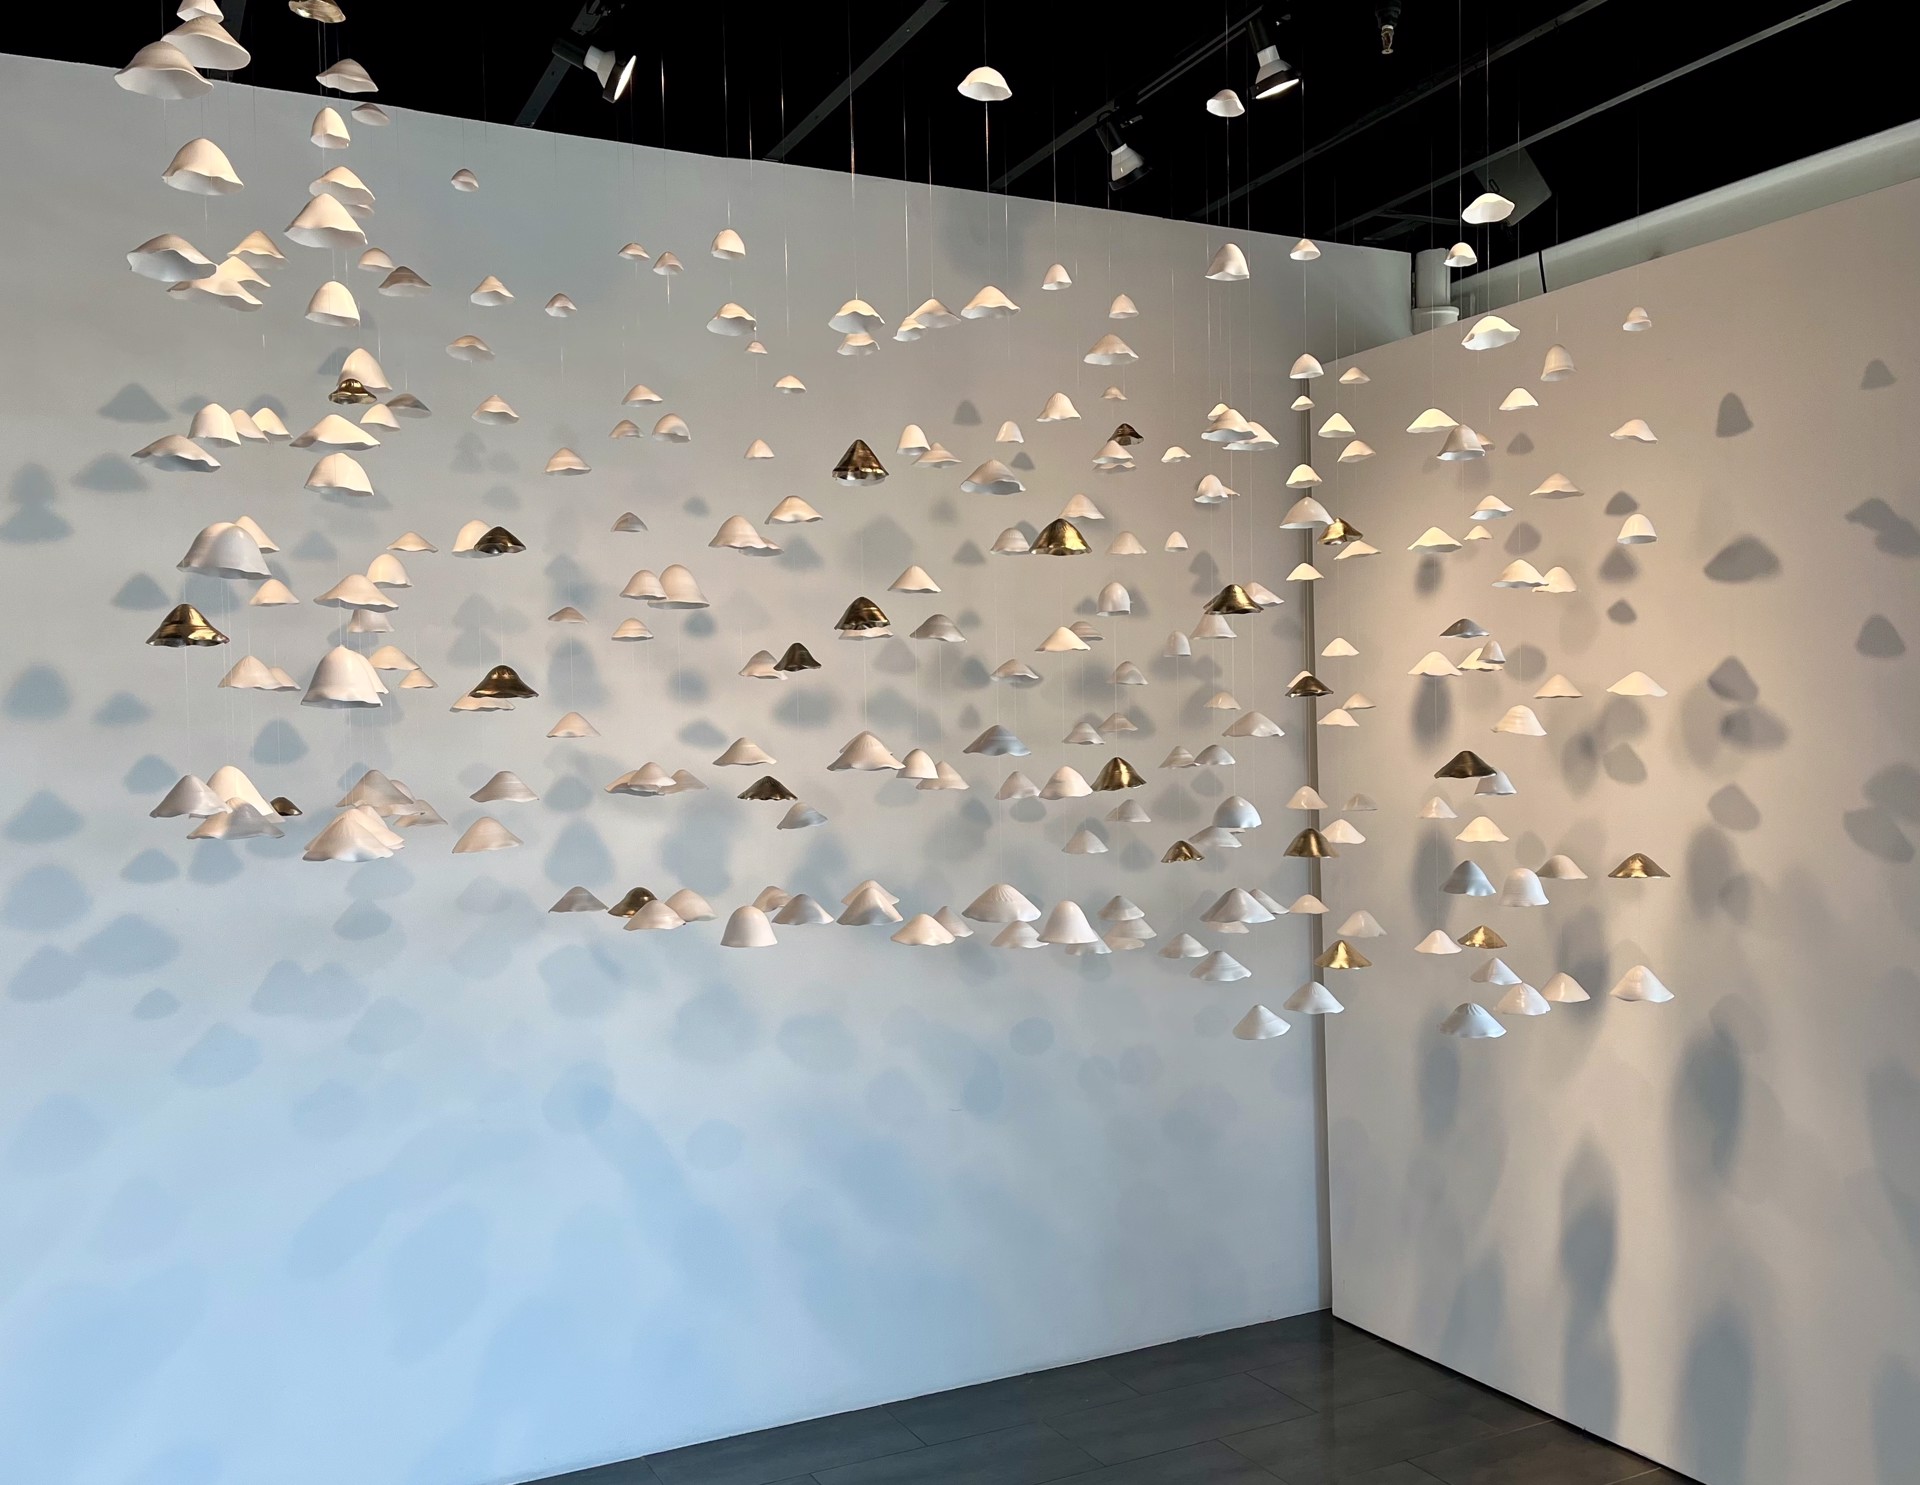 Lucrecia Waggoner Porcelain Wall Installation Custom Artwork Lucrecia Waggoner Floating Garden, 2022 Polished porcelain with moongold, suspended on wire7 x 4 x 2 ft